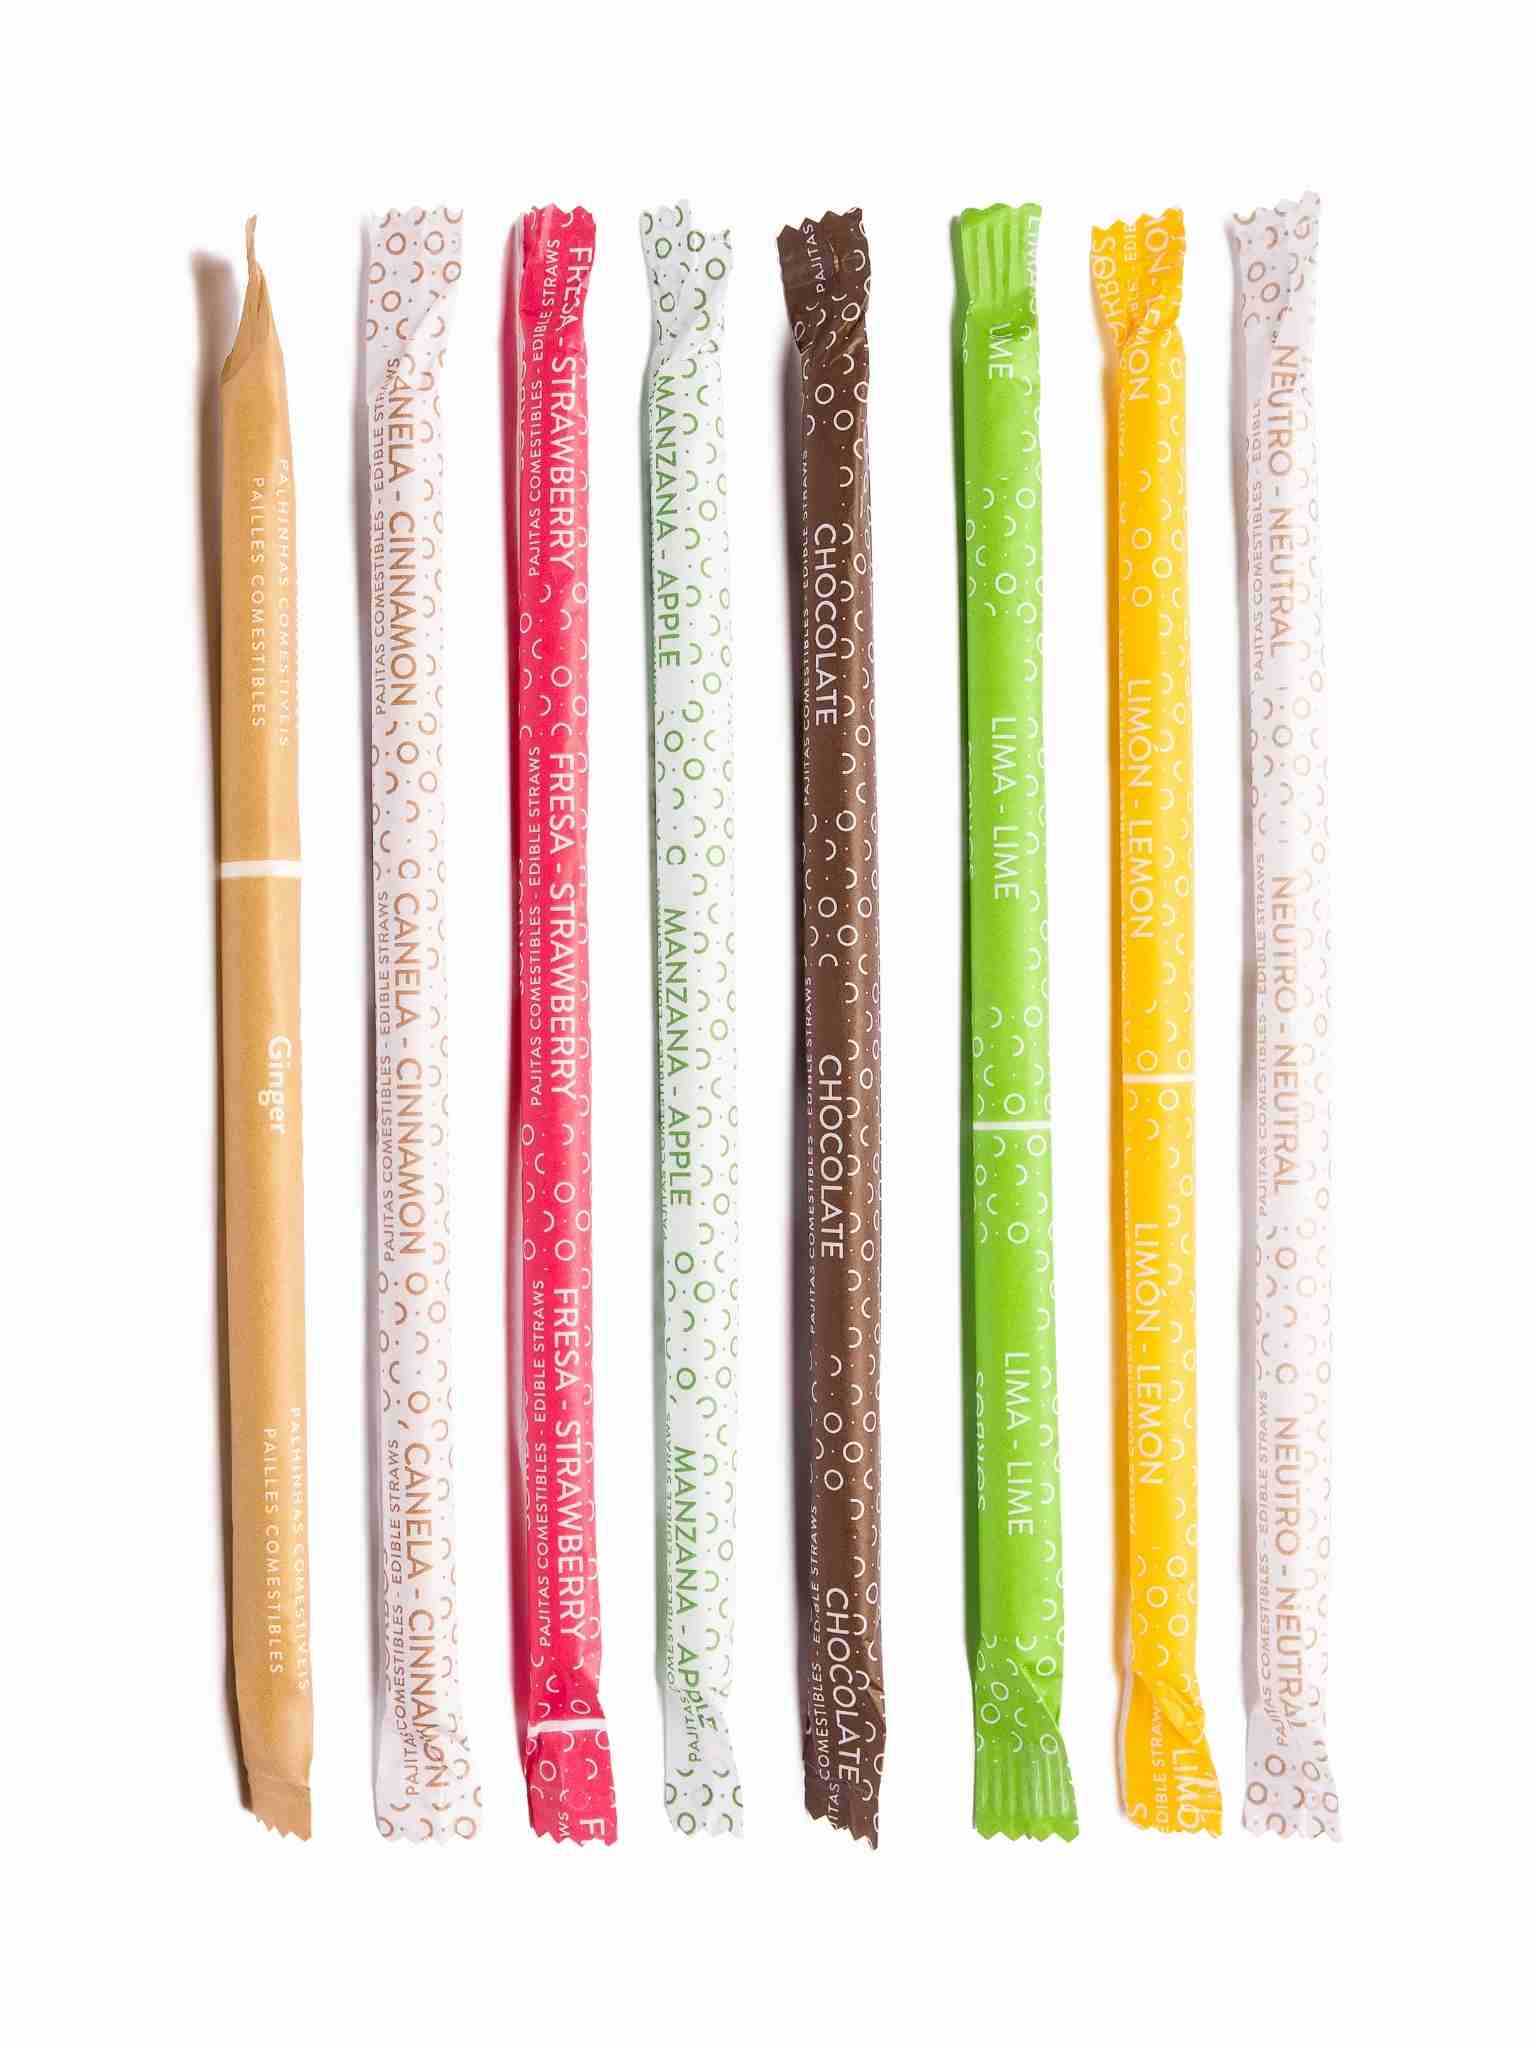 edible straws chocolate strawberry lemon cinnamon flavors packaging without plastic